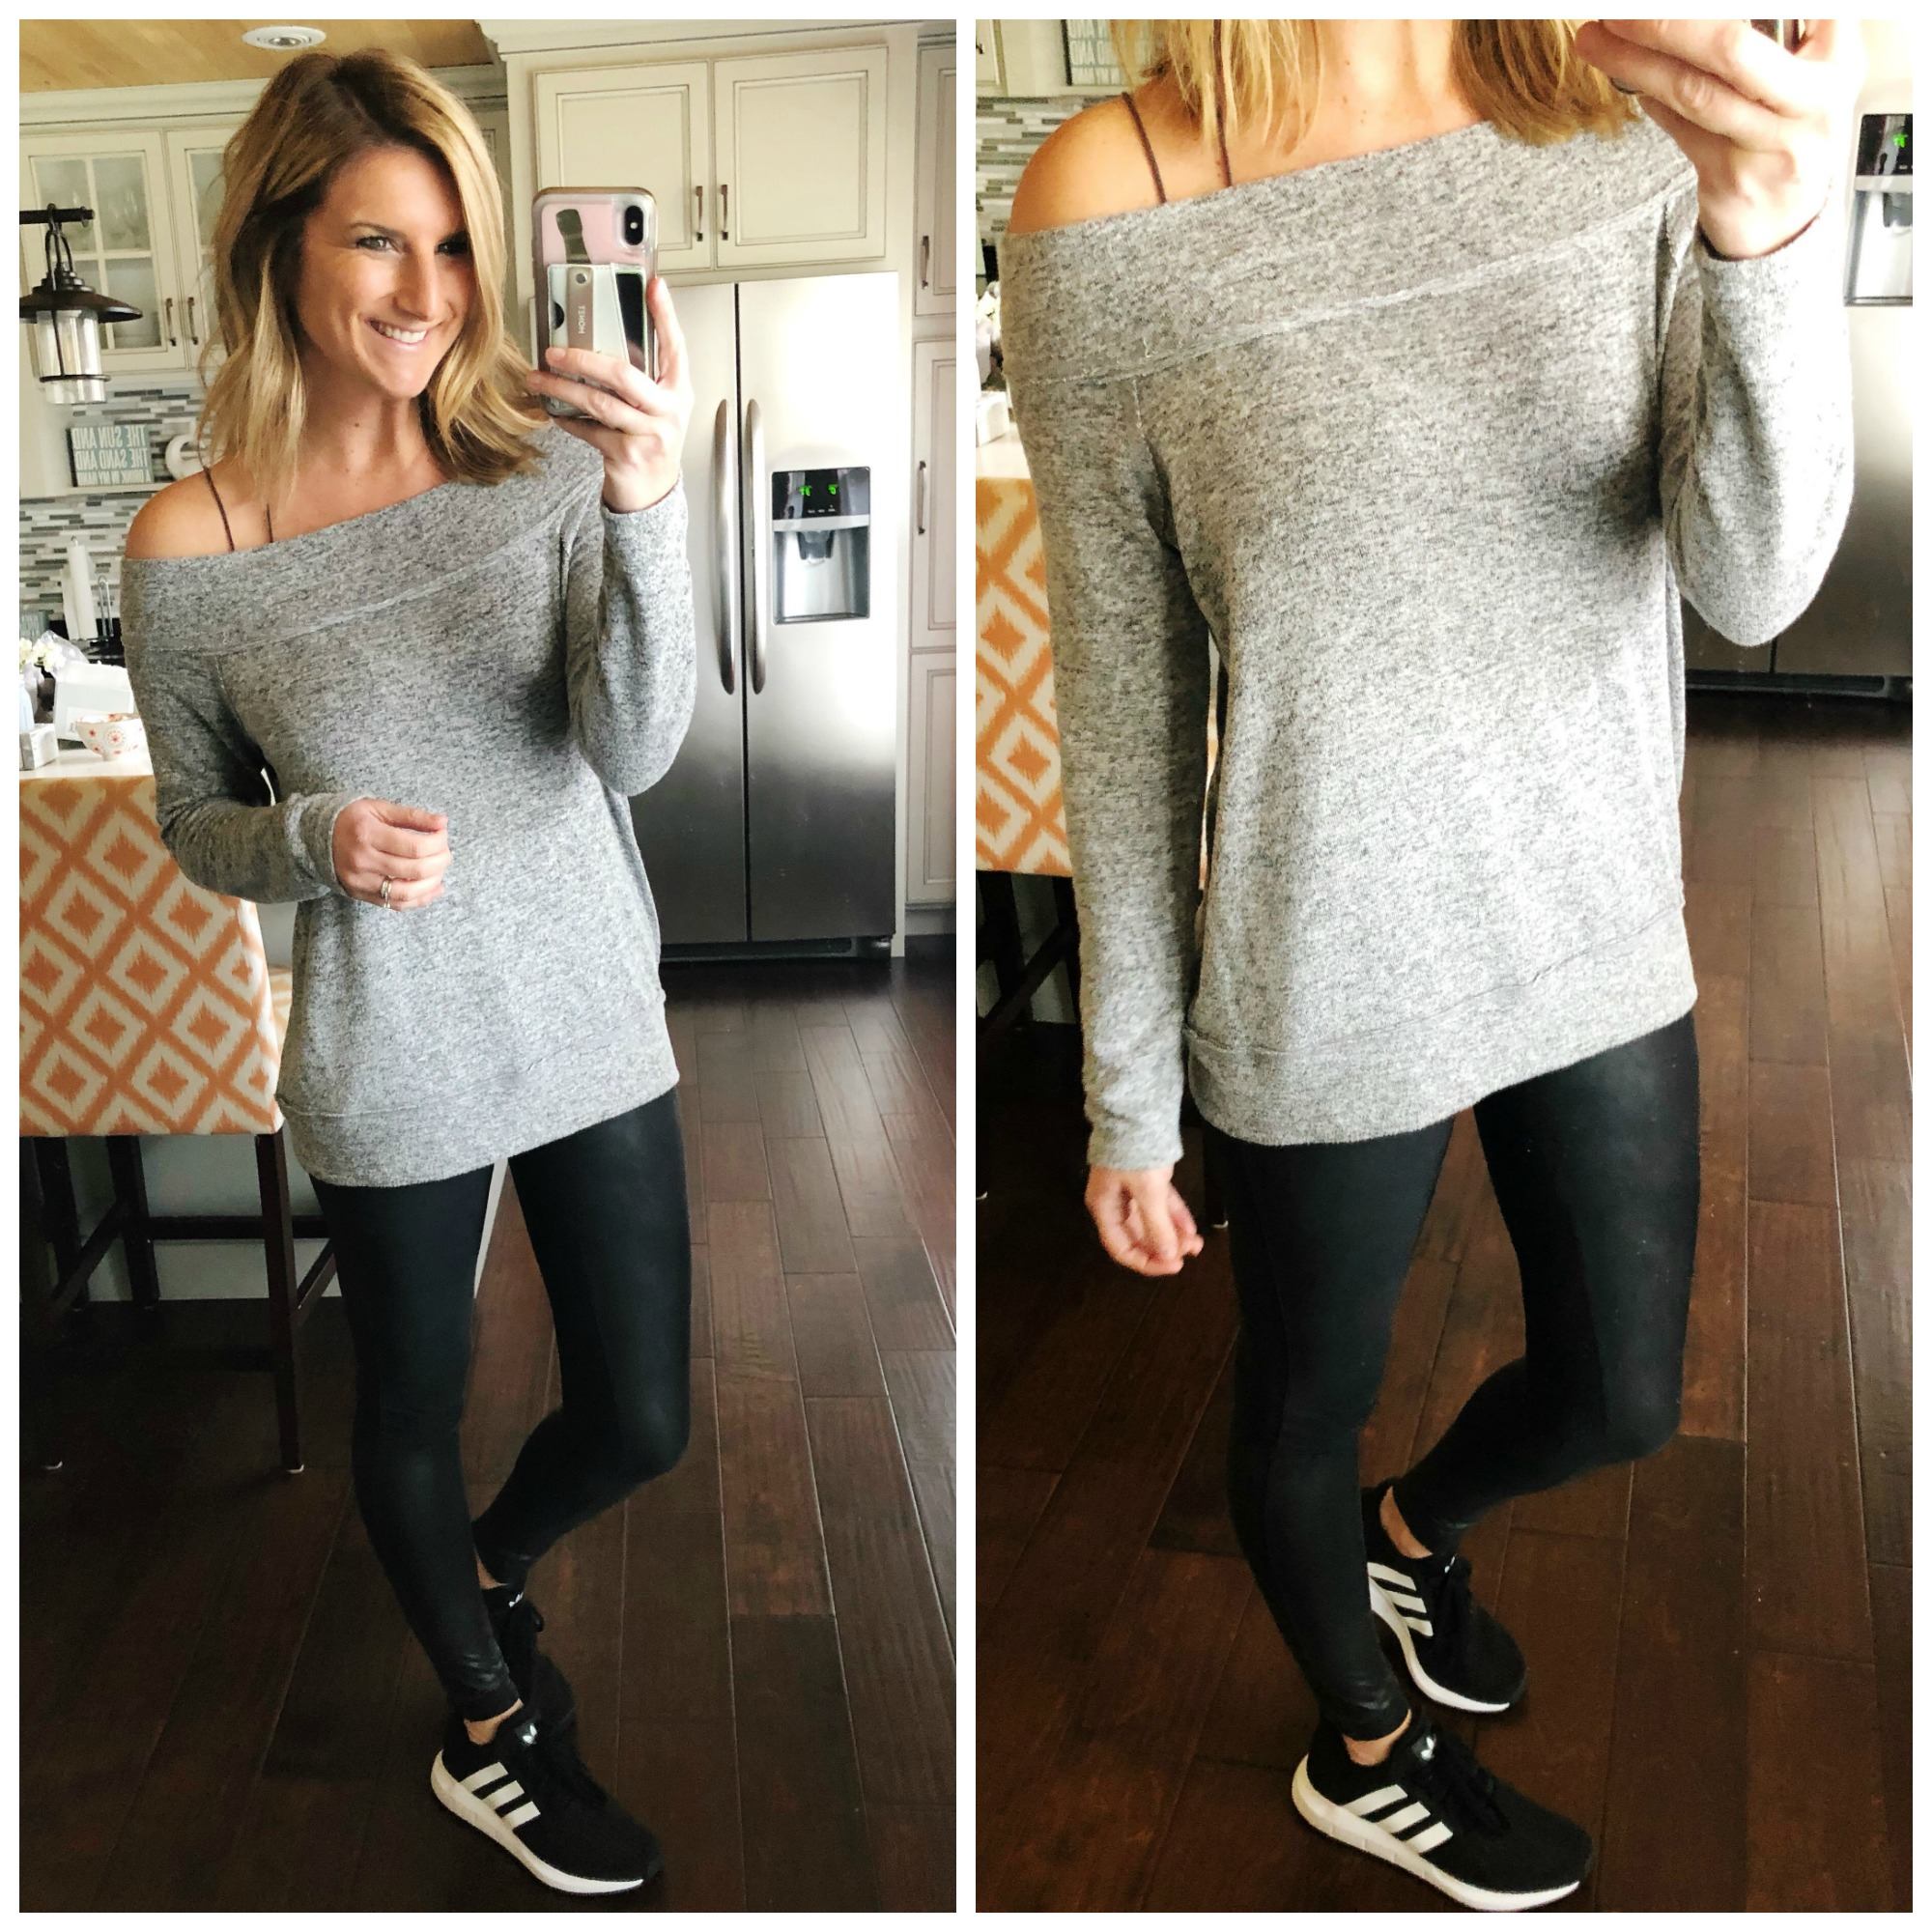 Off the Shoulder Sweater // Spanx Leggings // Faux Leather Leggings // Adidas Sneakers // Comfortable Sneakers